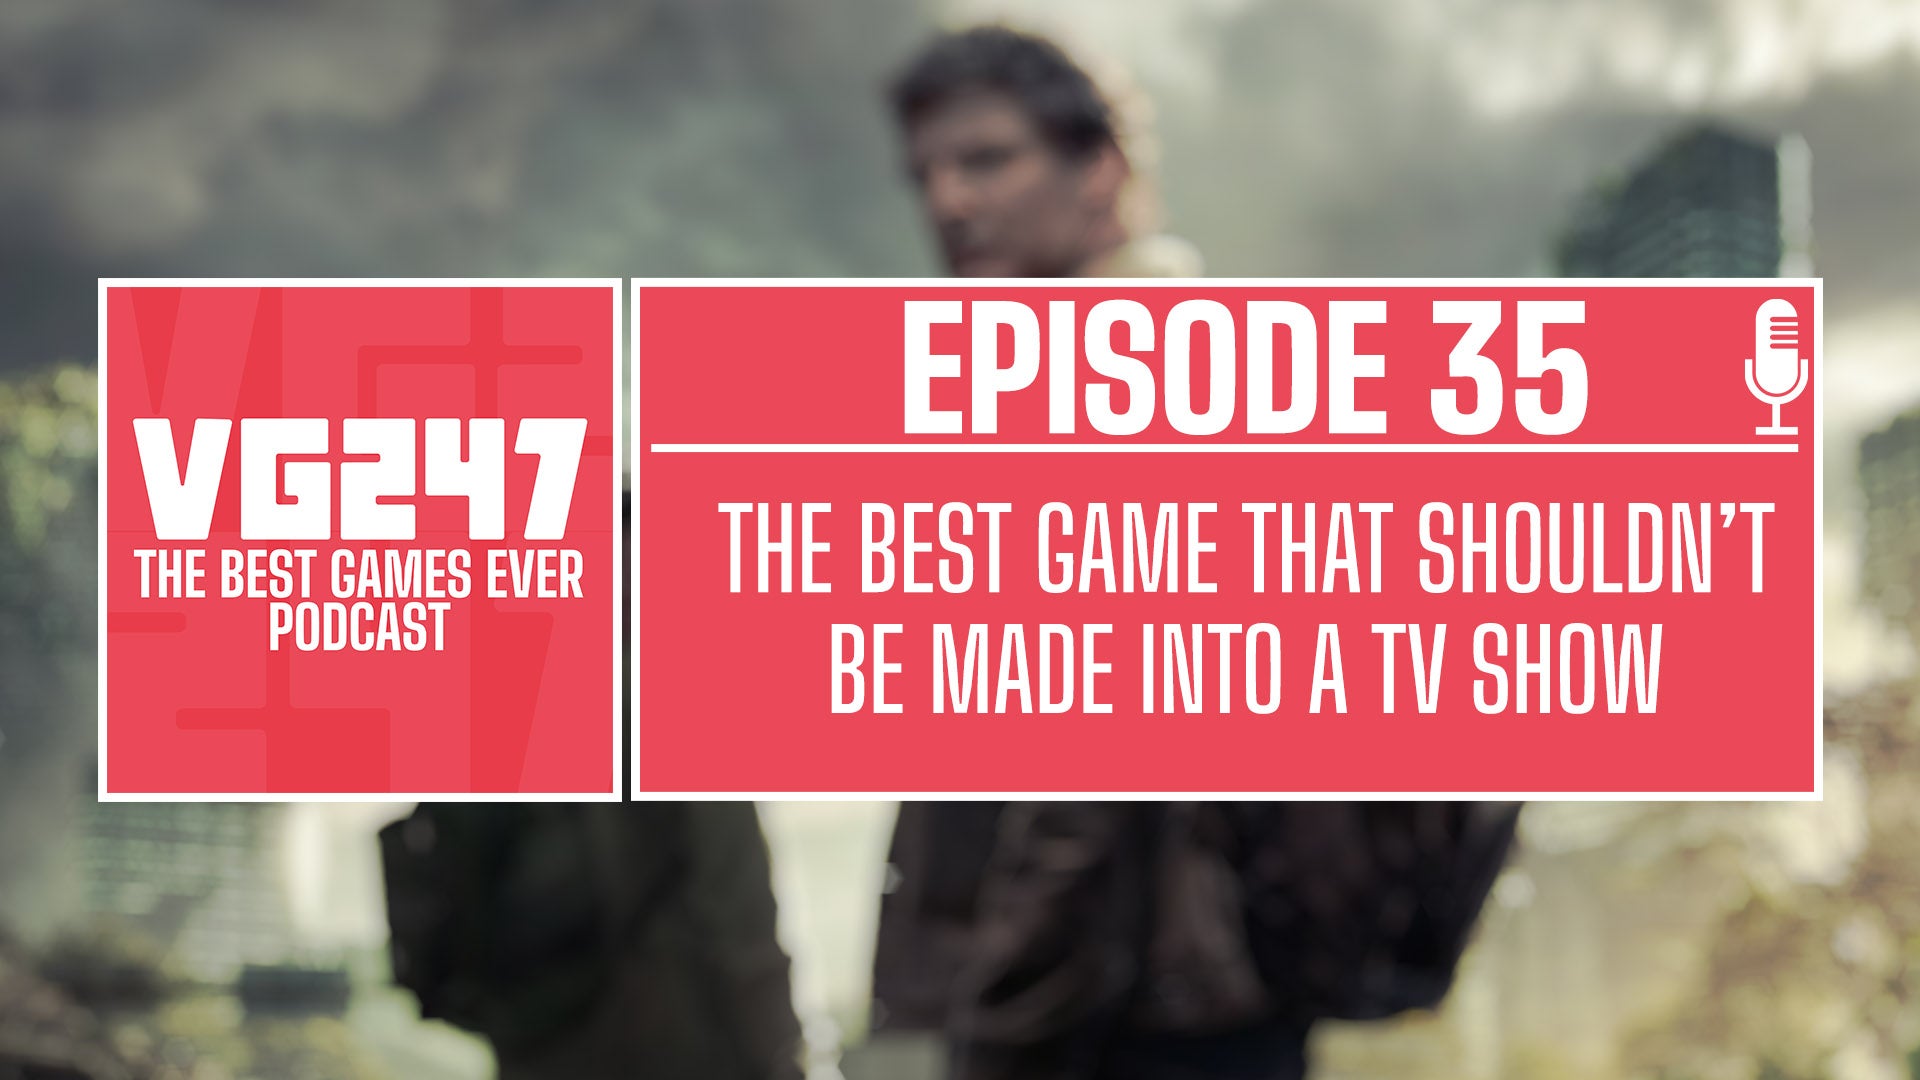 Image for VG247's The Best Games Ever Podcast – Ep.35: The best game that shouldn't be made into a TV show